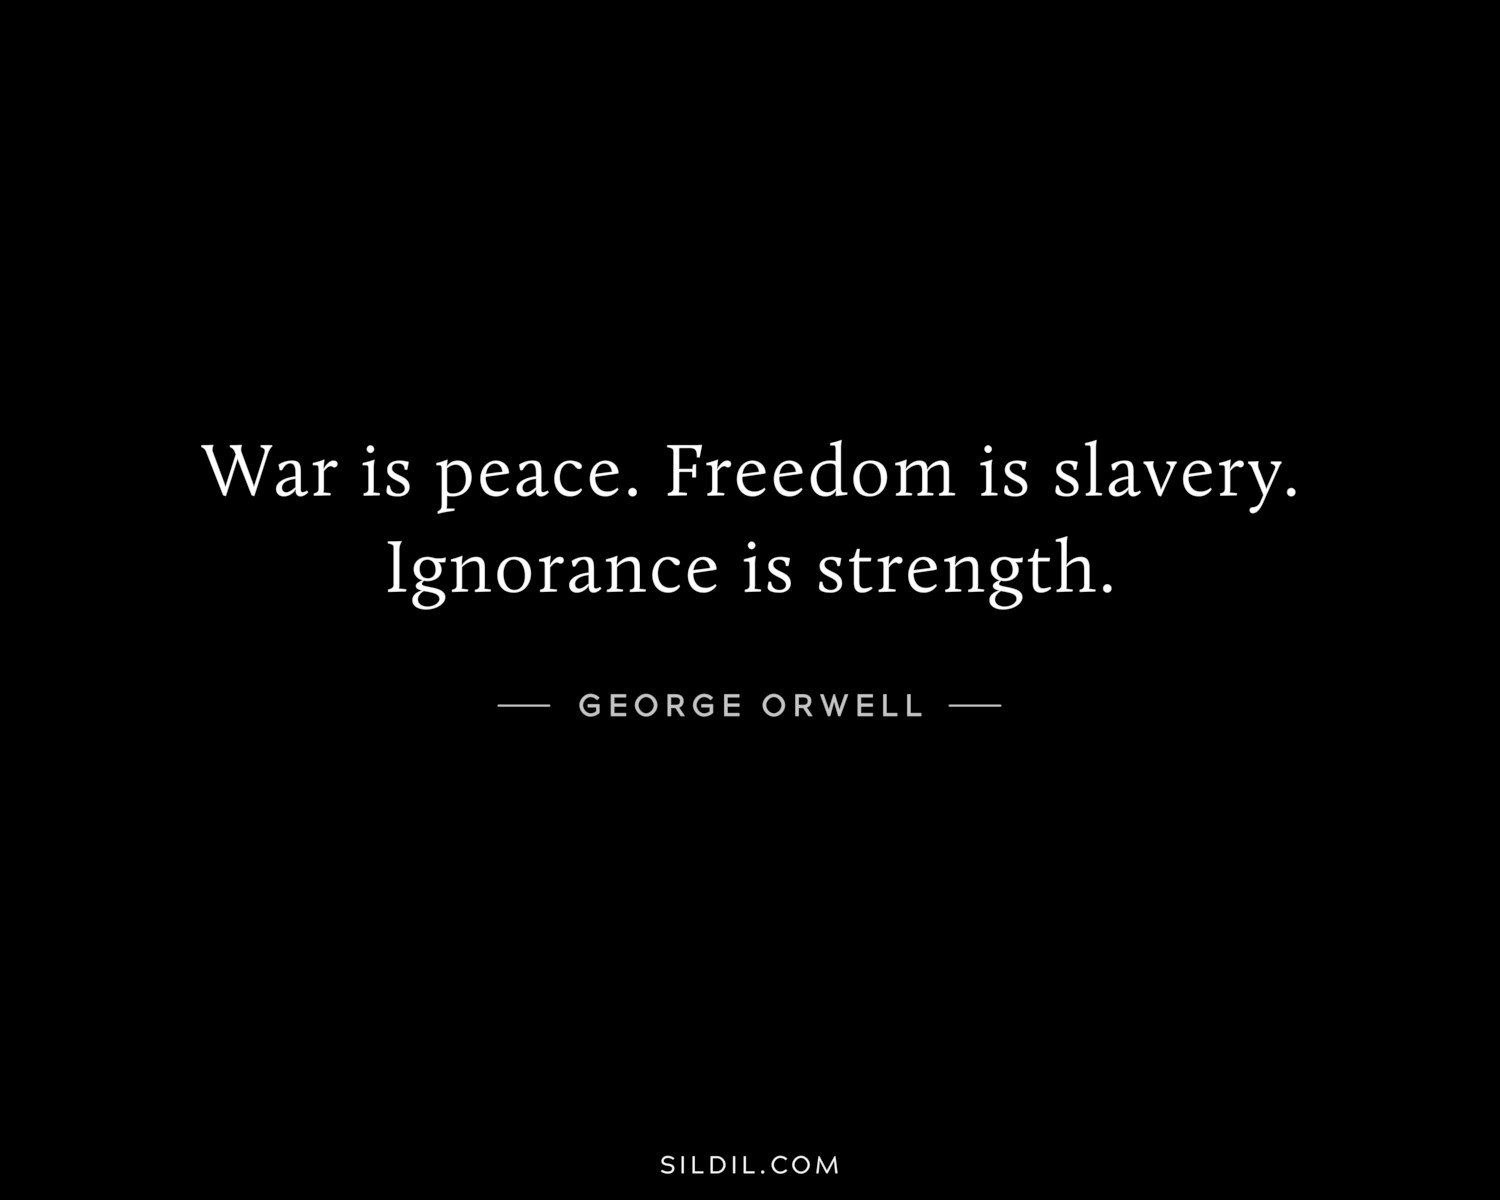 War is peace. Freedom is slavery. Ignorance is strength.